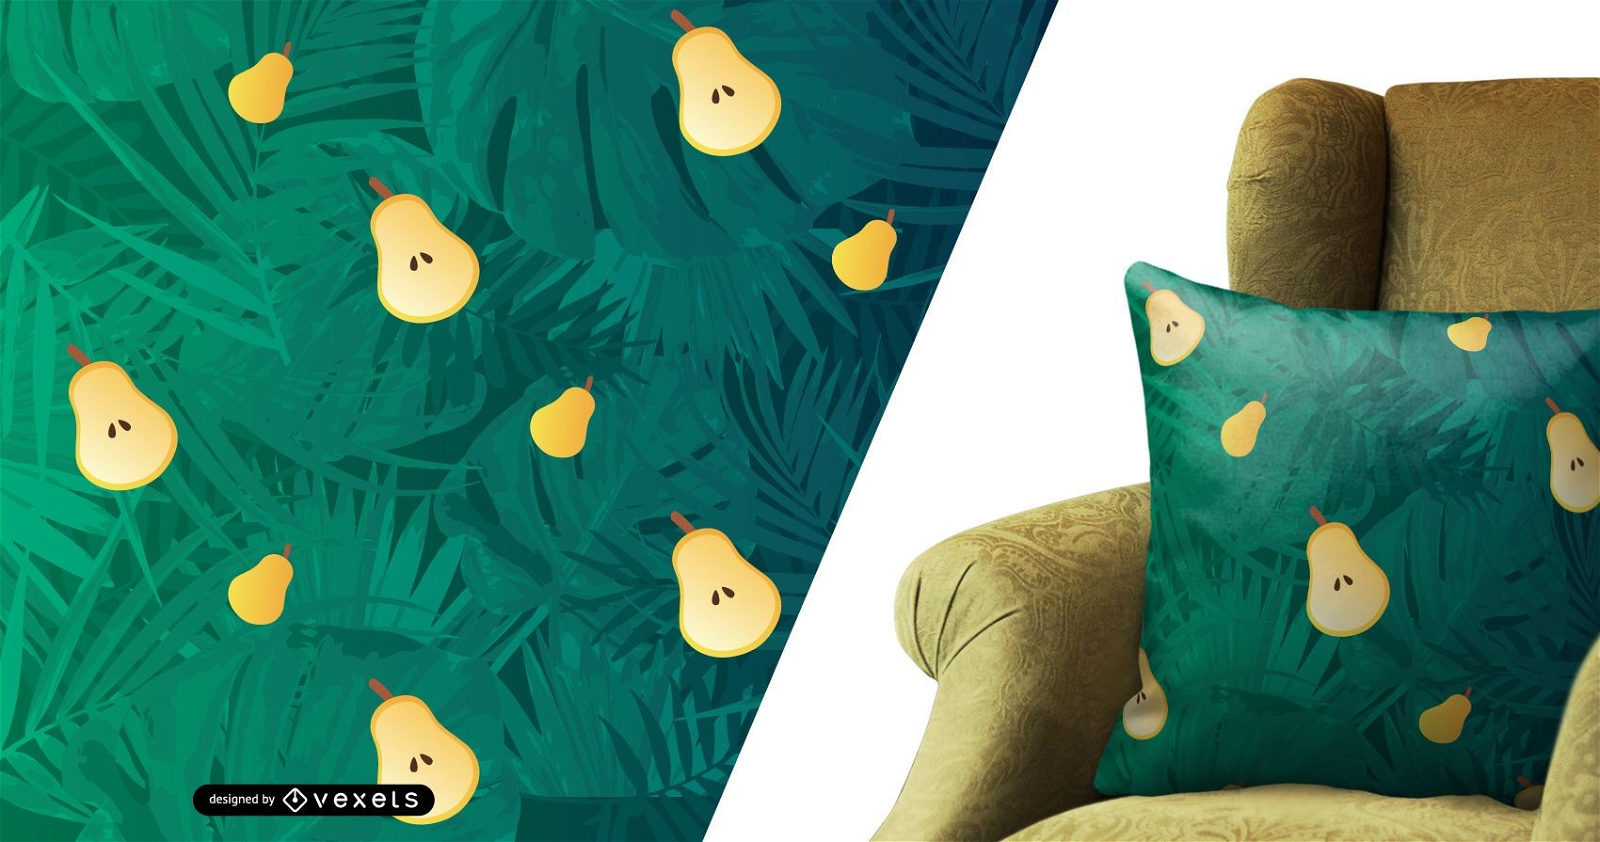 Pears and palm leaves pattern